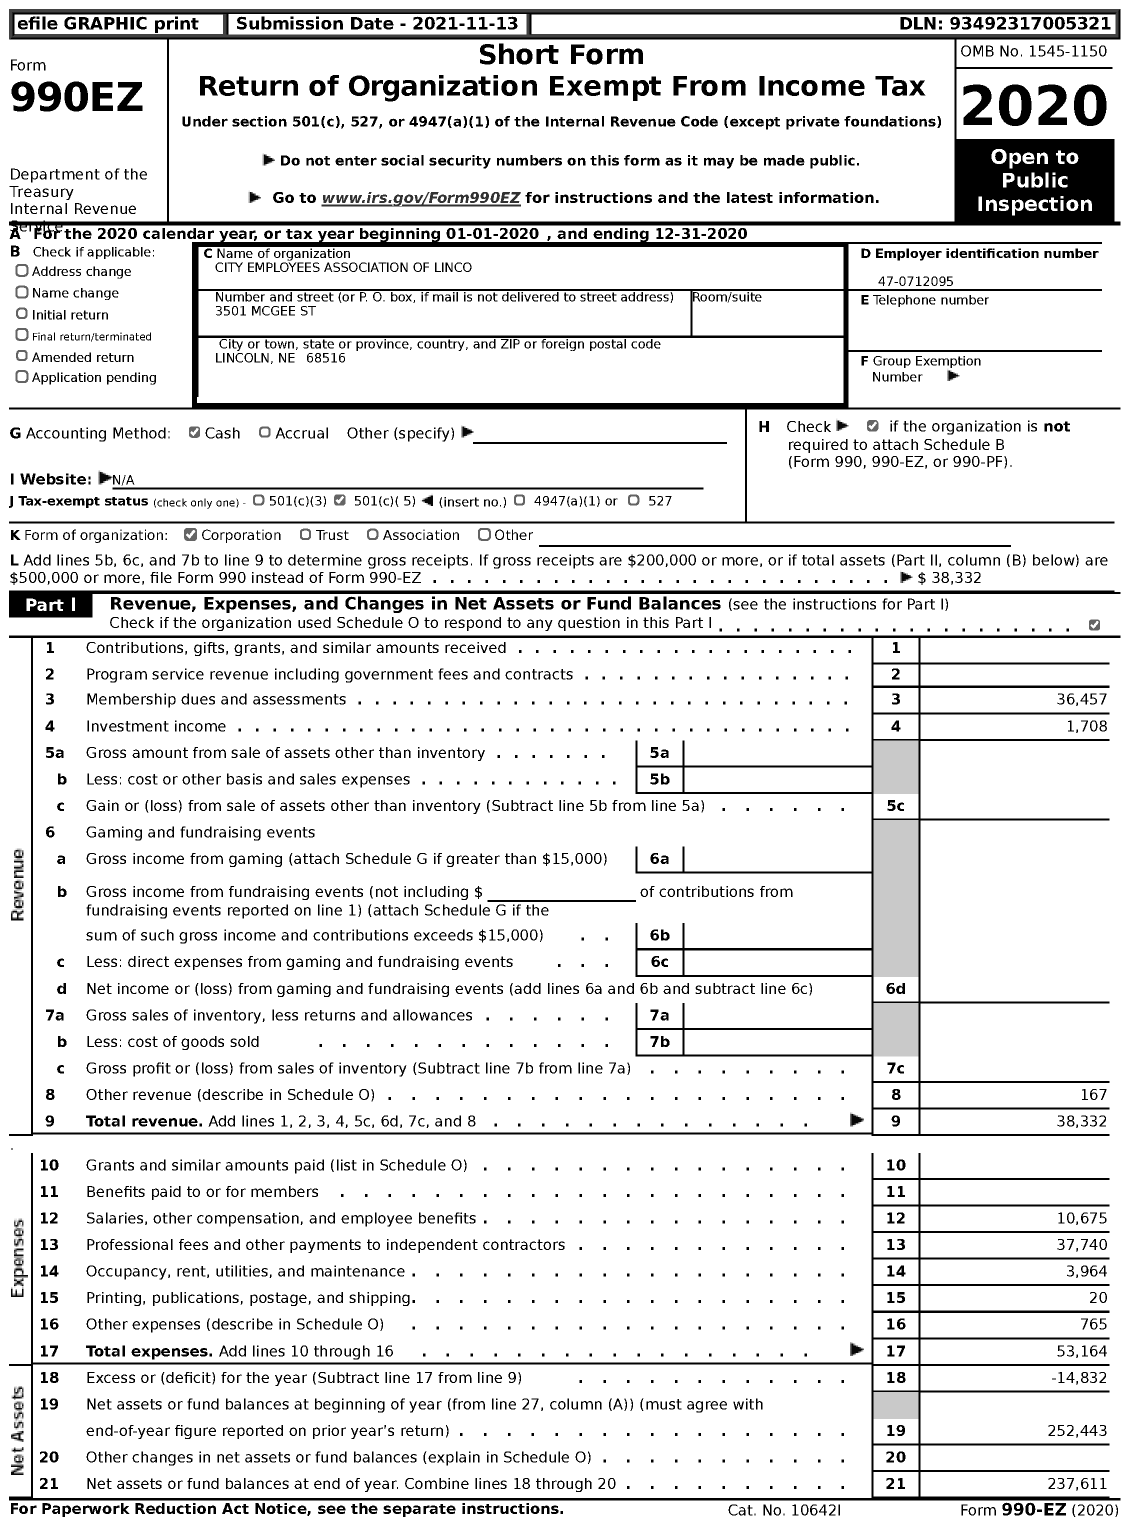 Image of first page of 2020 Form 990EZ for City Employees Association of Linco